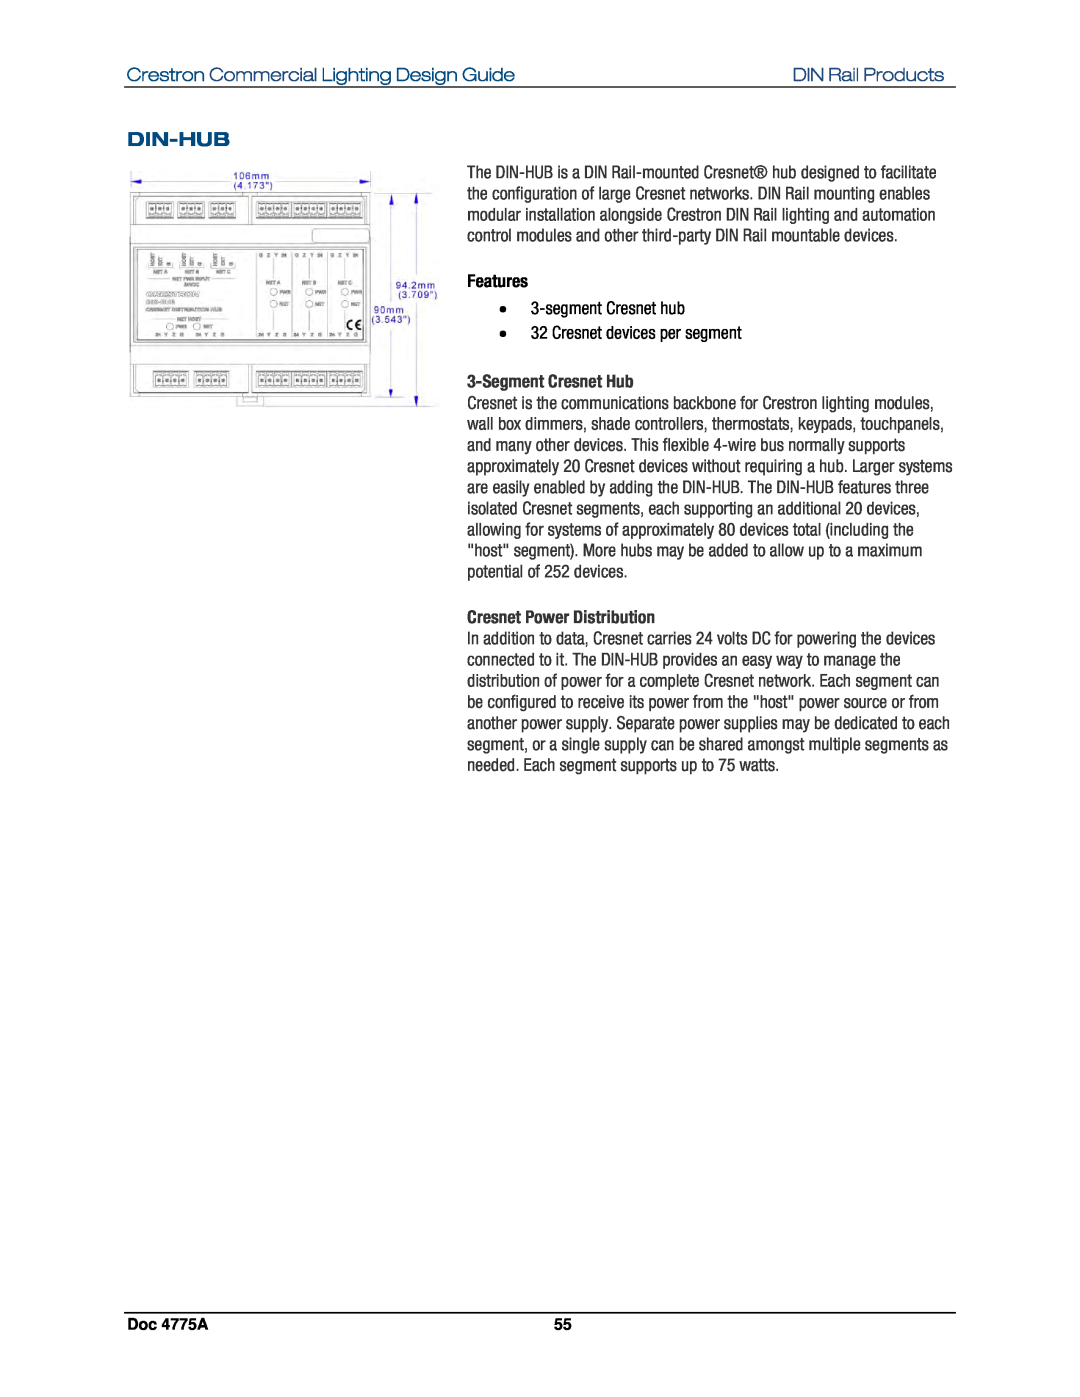 Crestron electronic GLPS-HSW-FT Din-Hub, Crestron Commercial Lighting Design Guide, DIN Rail Products, Features, Doc 4775A 